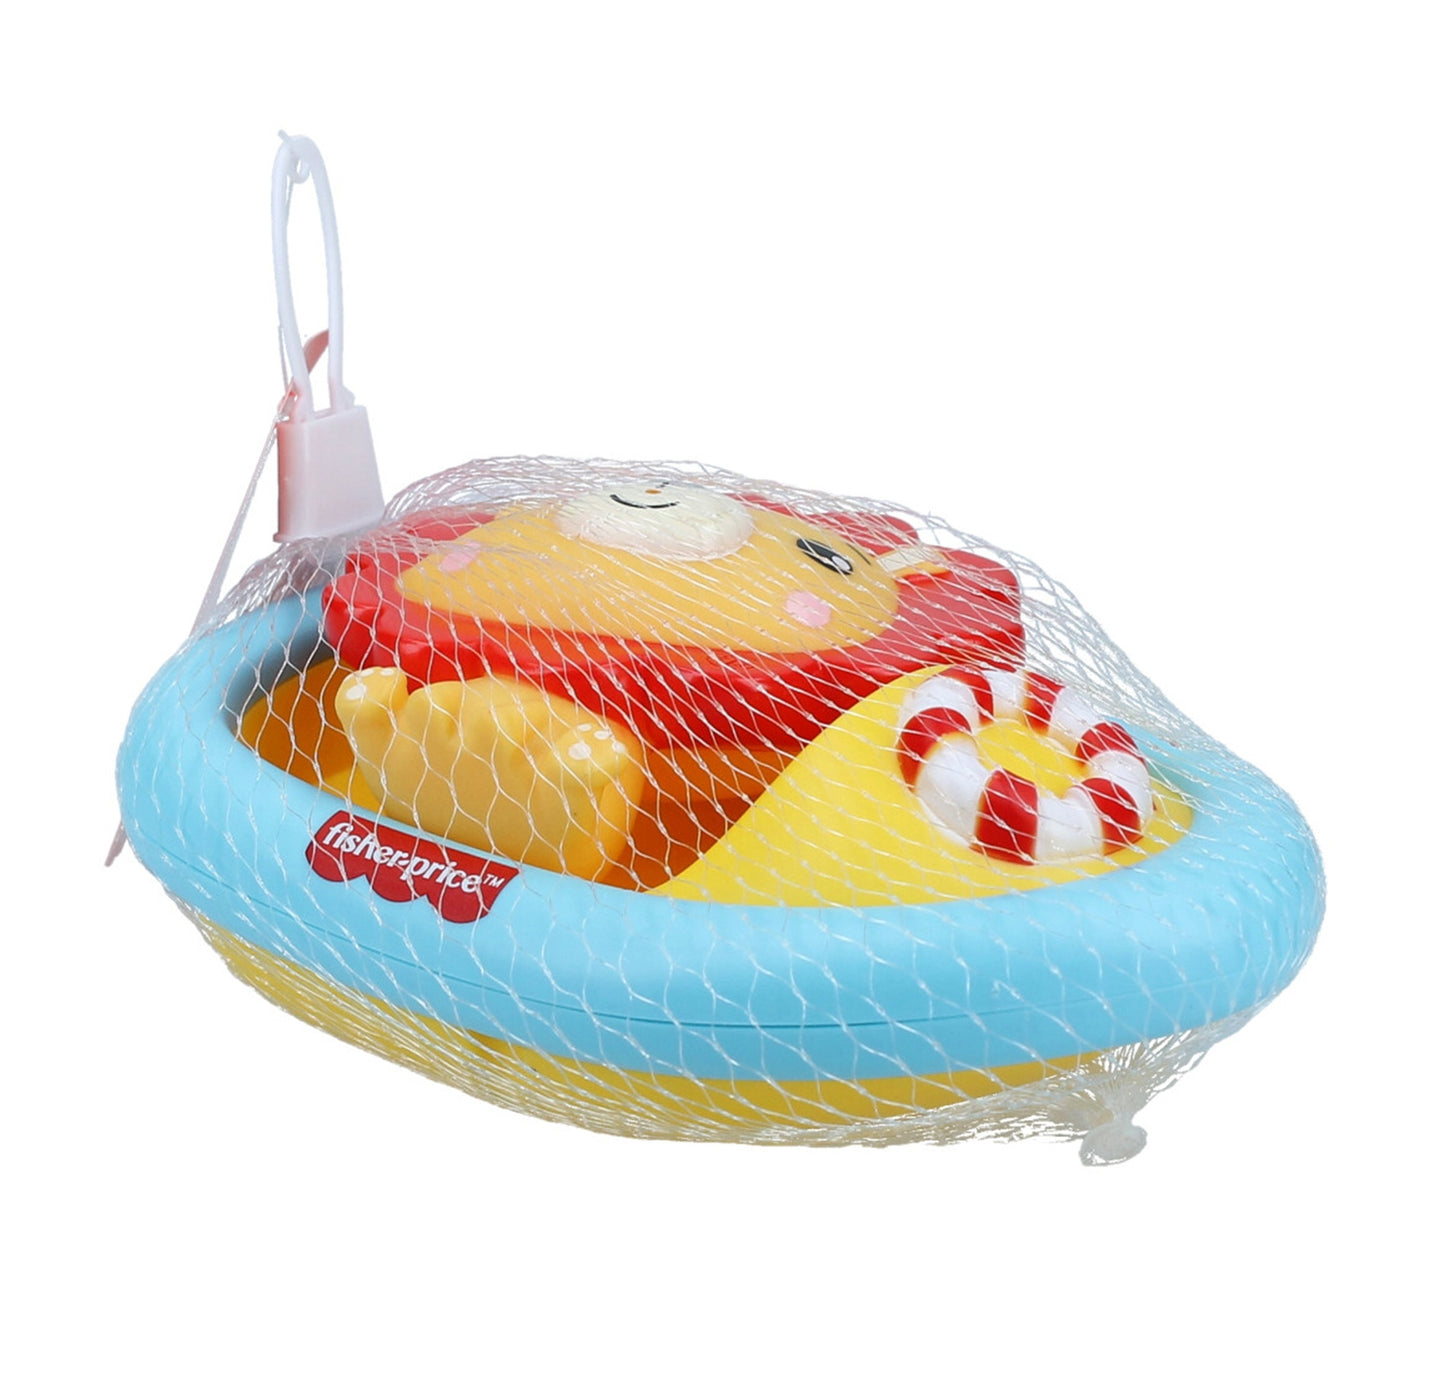 Fisher-Price - Bath Boats With Squiter Lion